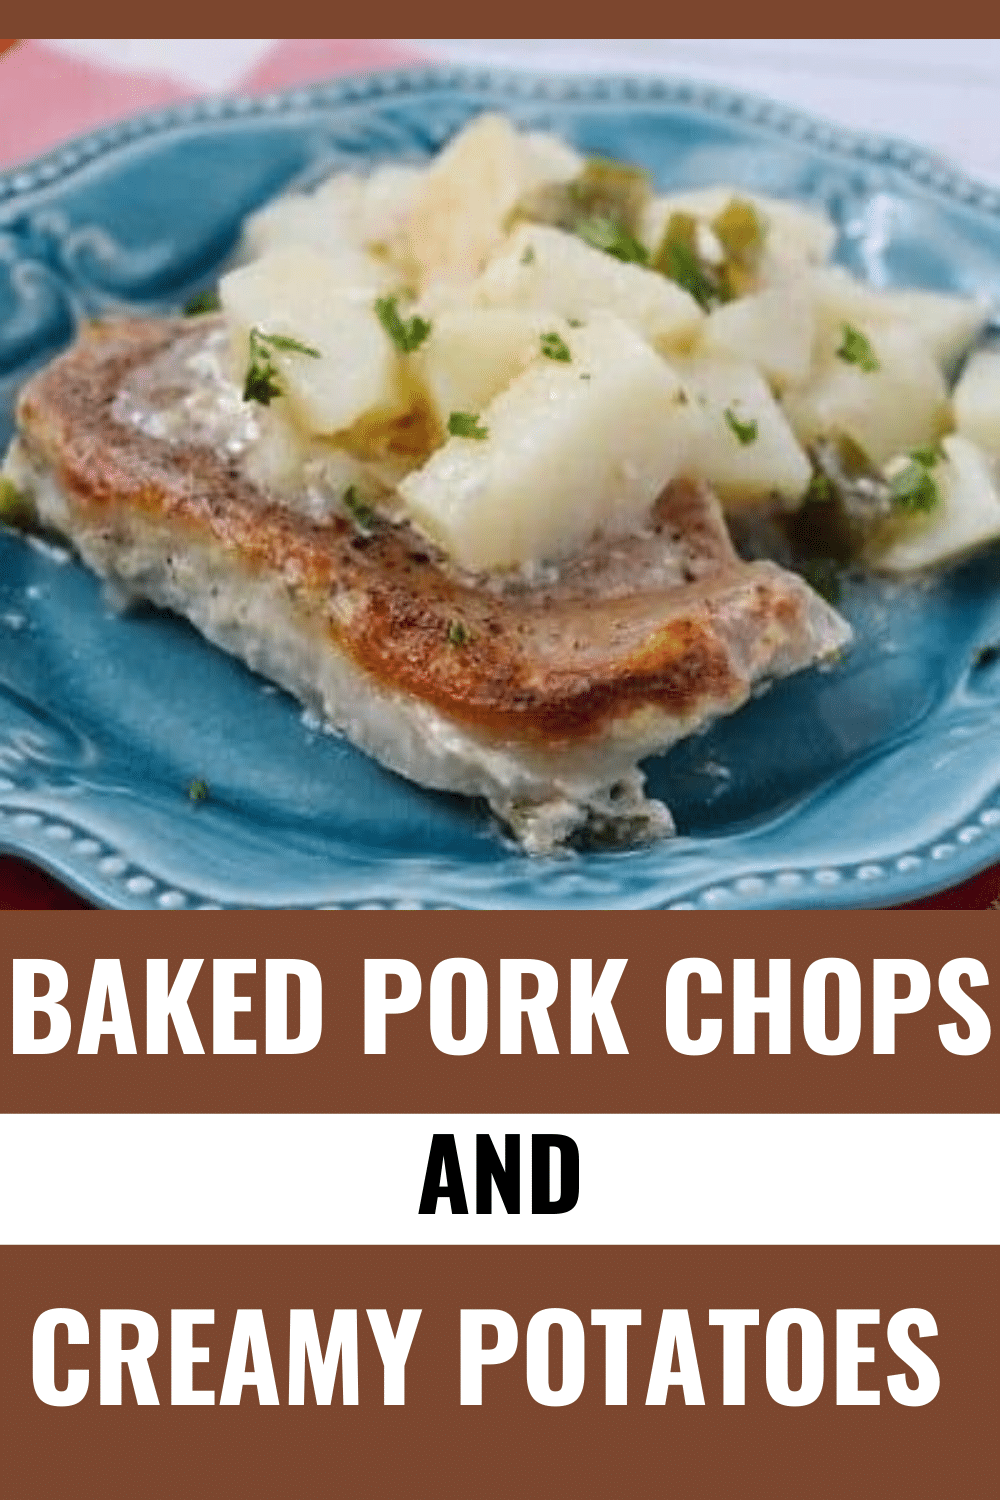 These baked pork chops and creamy potatoes are the perfect dinner for busy weeknights. Easy to make and everyone in the family loves them. #porkchops #potatoes #dinner #easydinner via @wondermomwannab